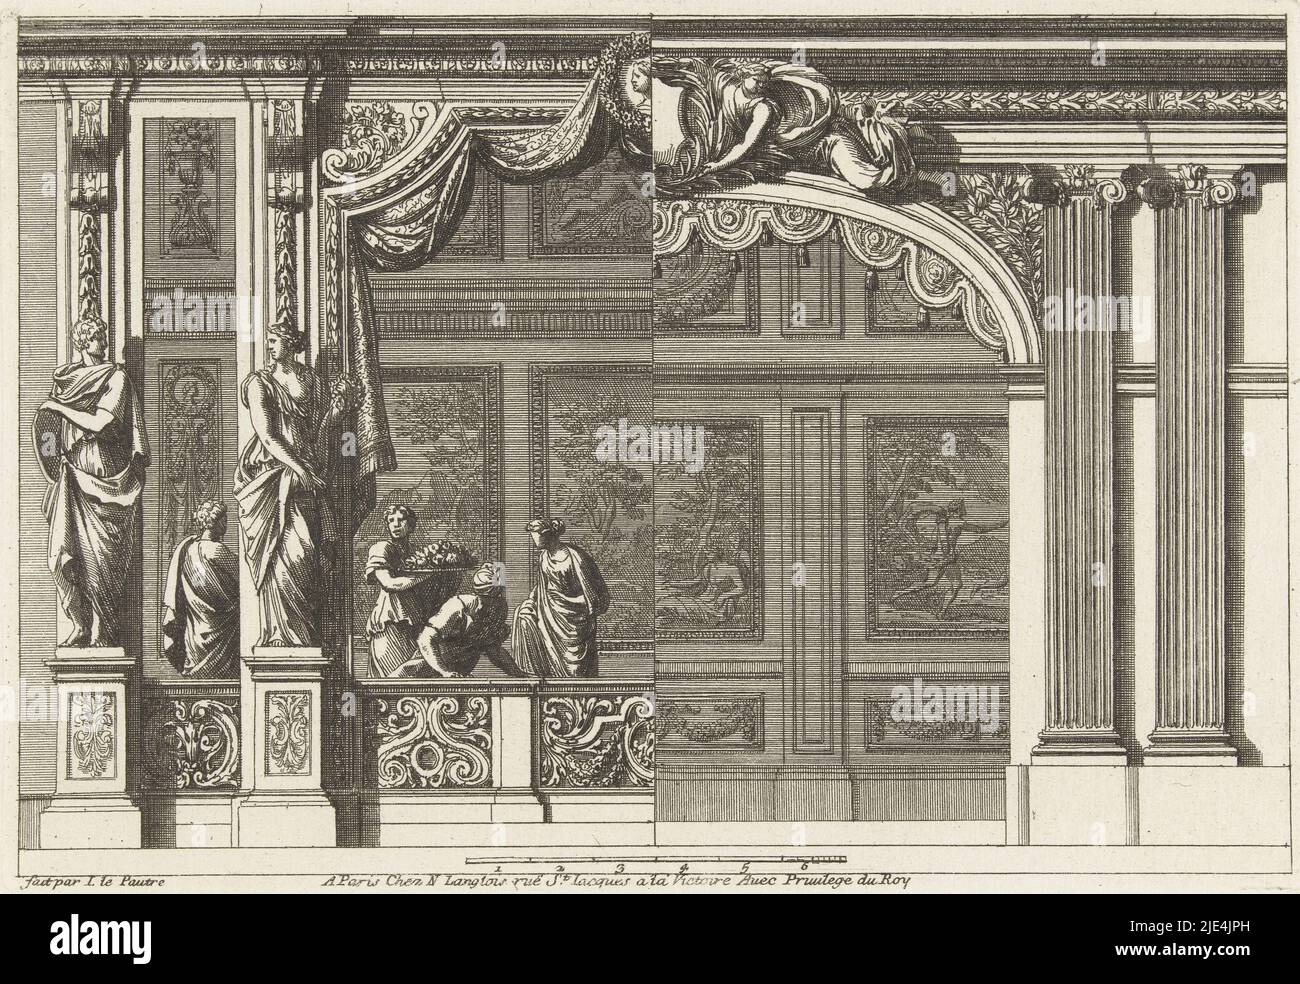 Alcove with variant for right half, Jean Lepautre, 1678, The alcove on the left is closed by a balustrade decorated with foliate vines and two sculptures. The right side is a variant with two Ionic pilasters. Sheet 2 from series of 6 sheets., print maker: Jean Lepautre, (mentioned on object), Jean Lepautre, publisher: Nicolas Langlois (I), (mentioned on object), print maker: France, (possibly), France, (possibly), publisher: Paris, 1678, paper, etching, h 143 mm × w 210 mm Stock Photo